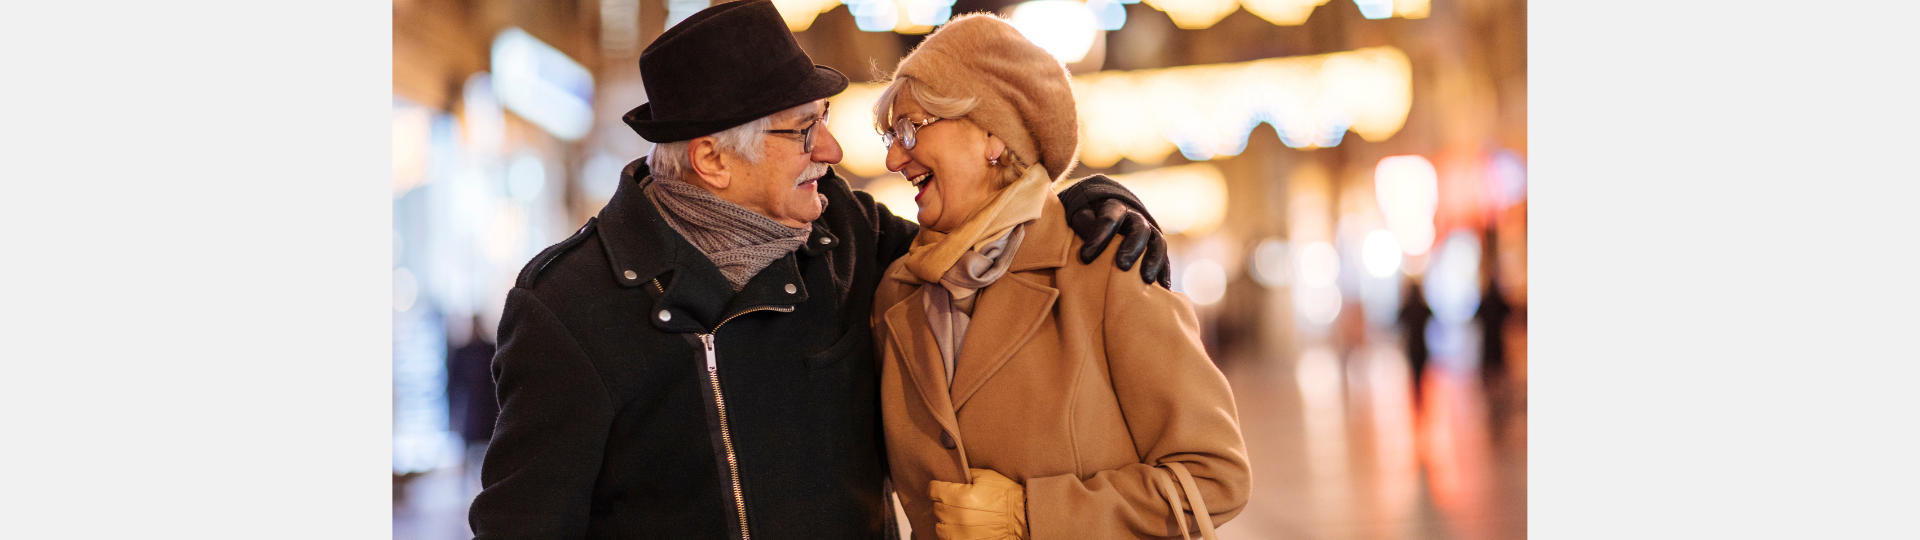 a man and woman hugging. they are wearing winter coats and are outside at night.